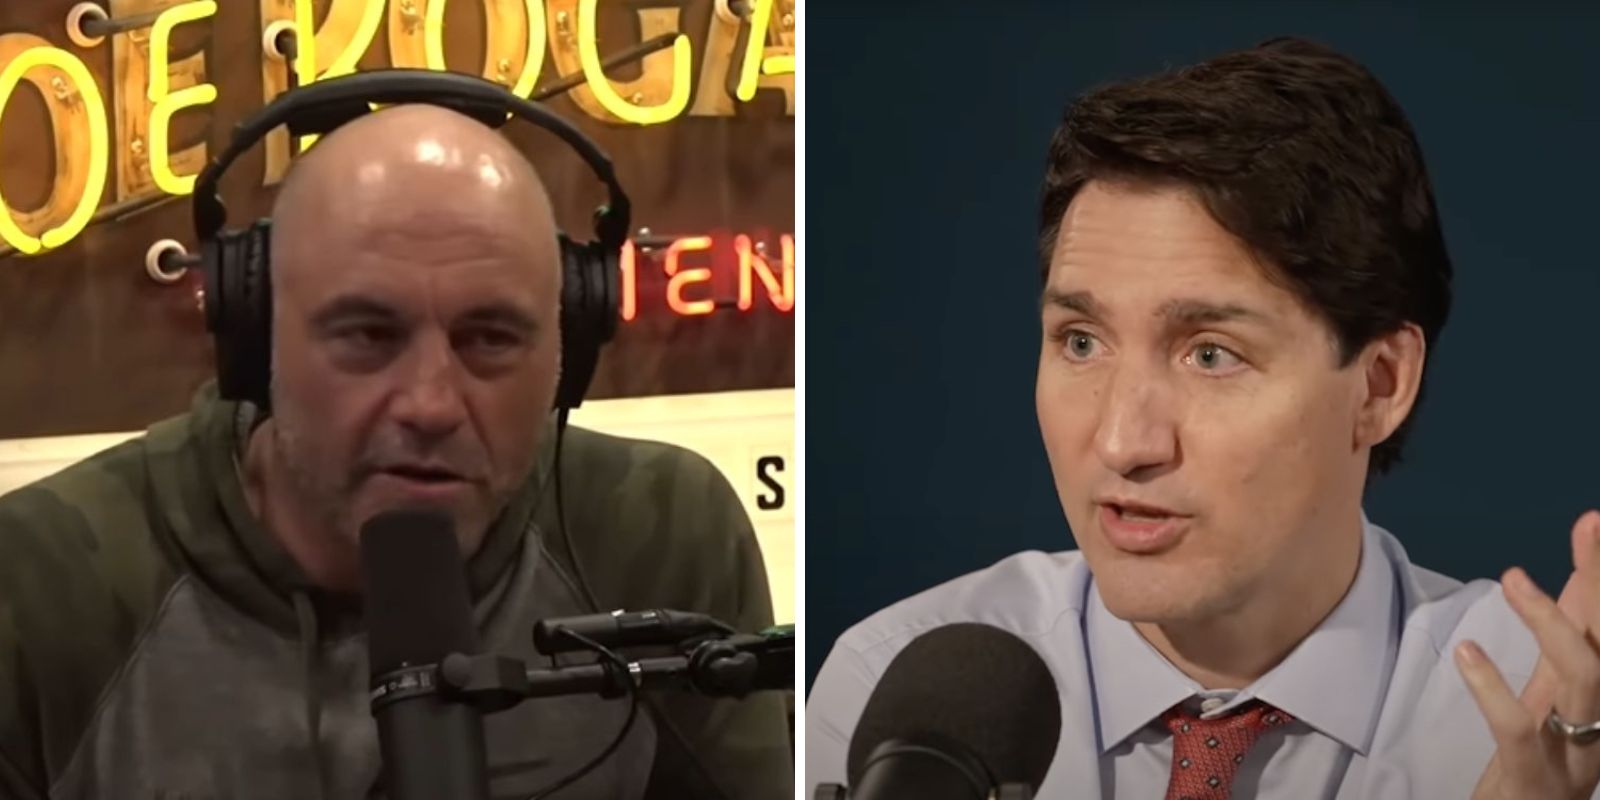 WATCH: Joe Rogan is 'disgusted' by Trudeau saying Canadians don't have the right to use guns for self-defense